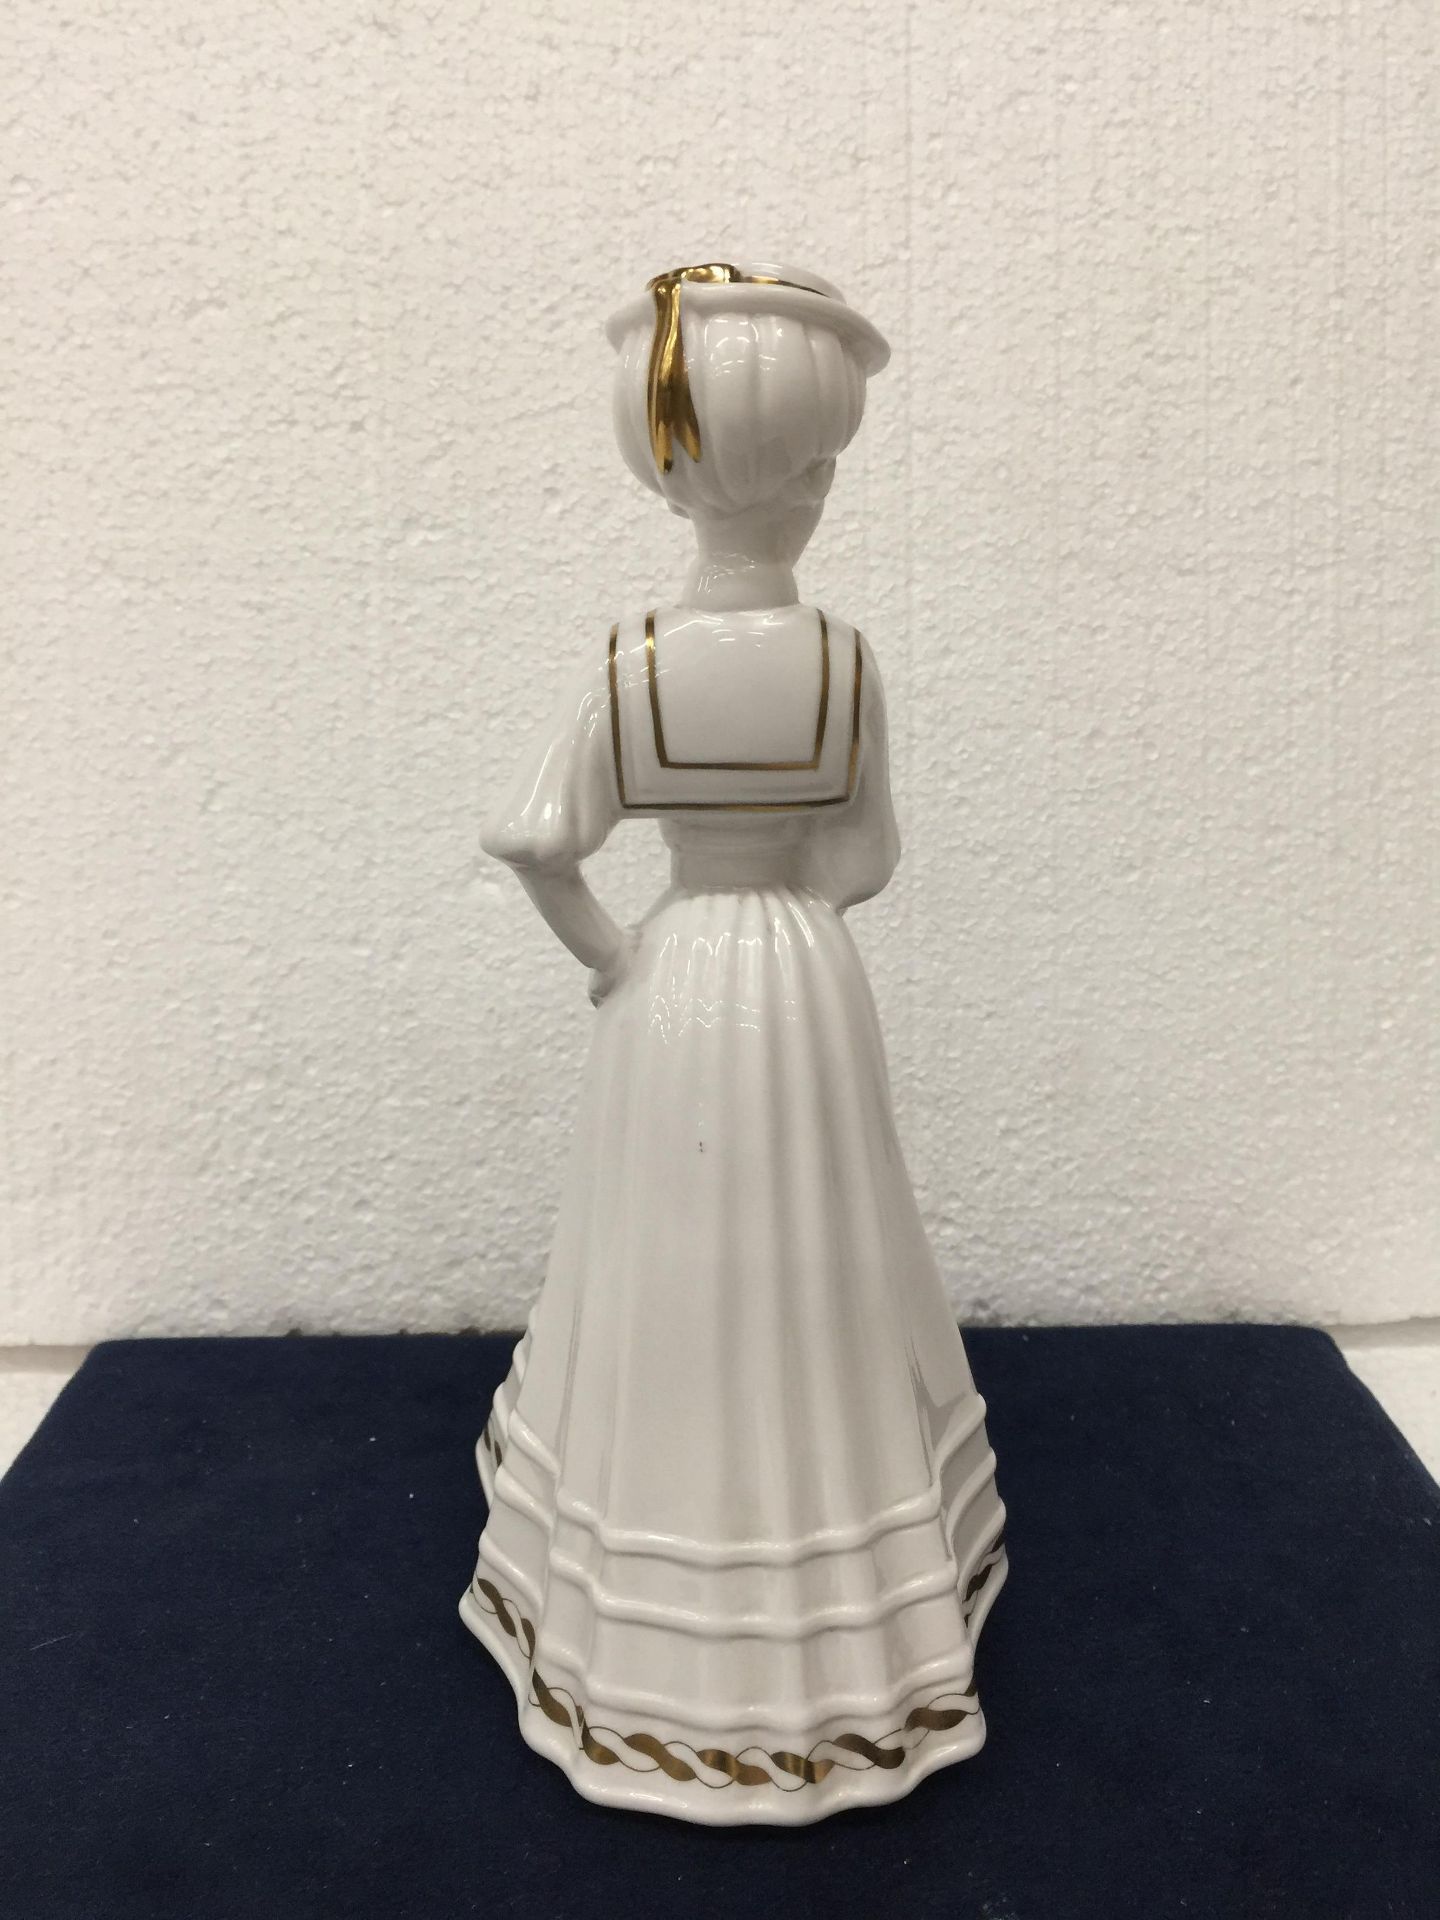 A SPODE FIGURINE "LILY" BY PAULINE SHONE IN GLOSS - 24CM (H) - Image 5 of 7